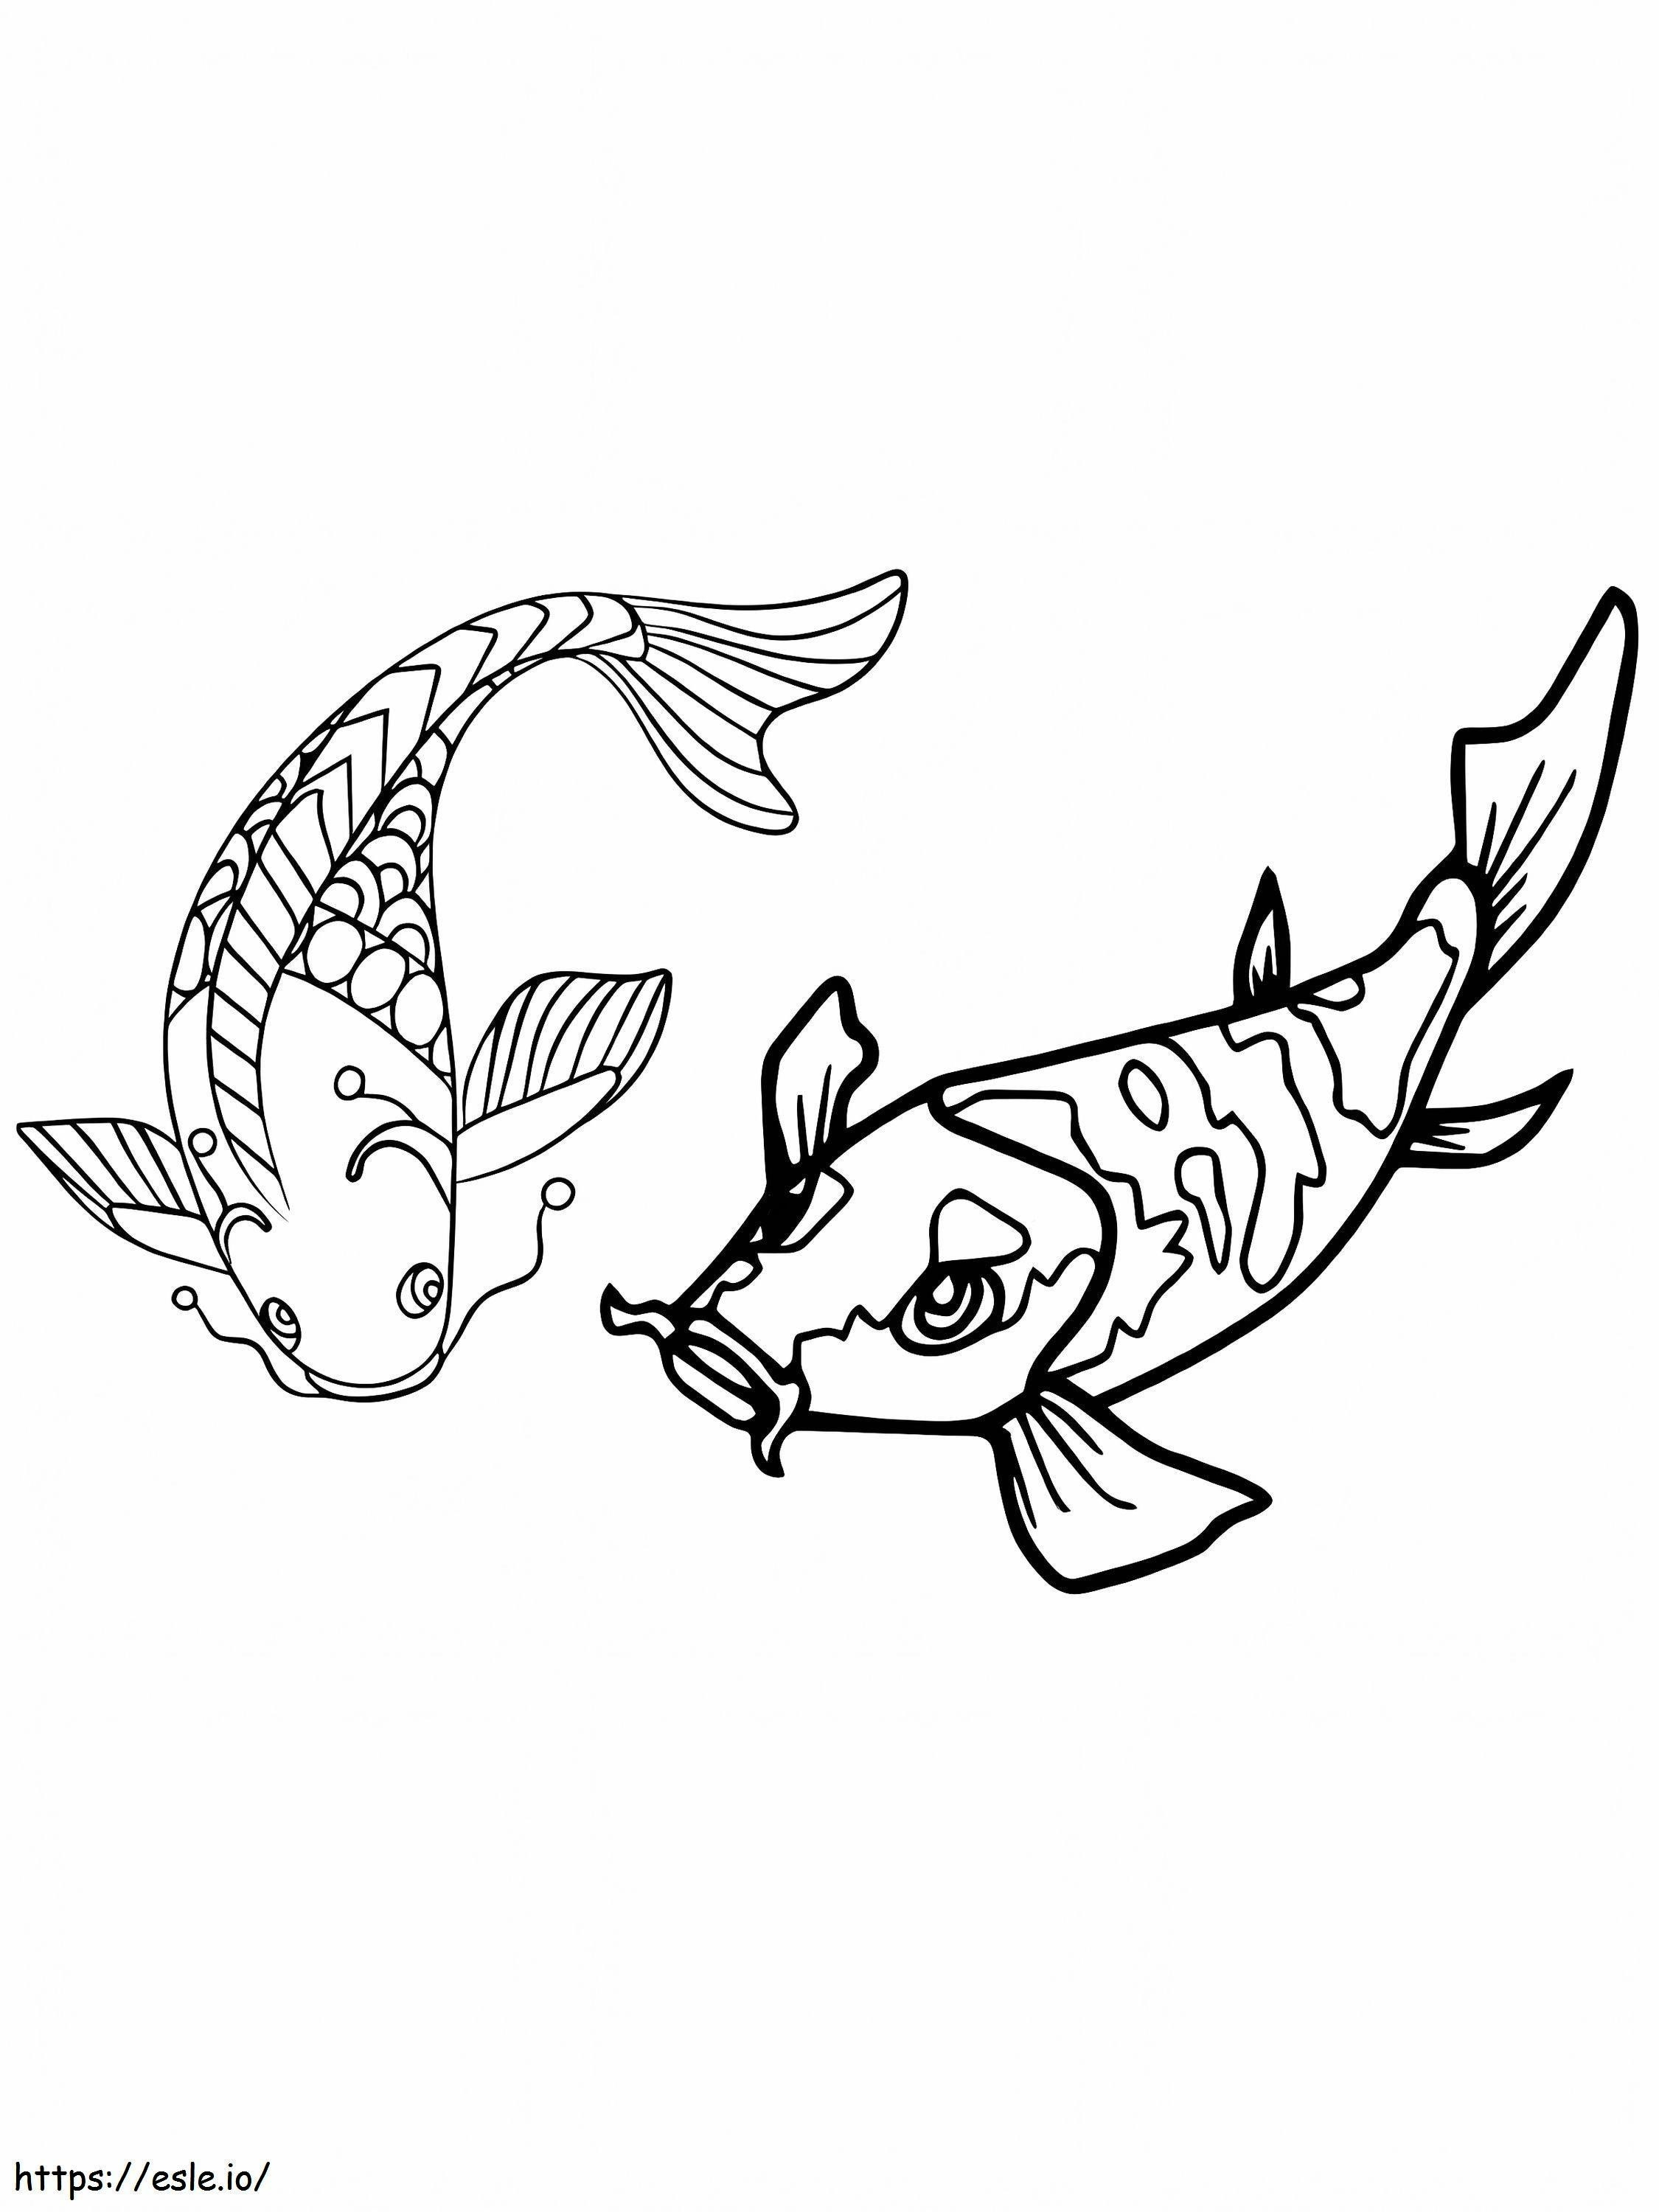 Two Old Koi Fishes coloring page